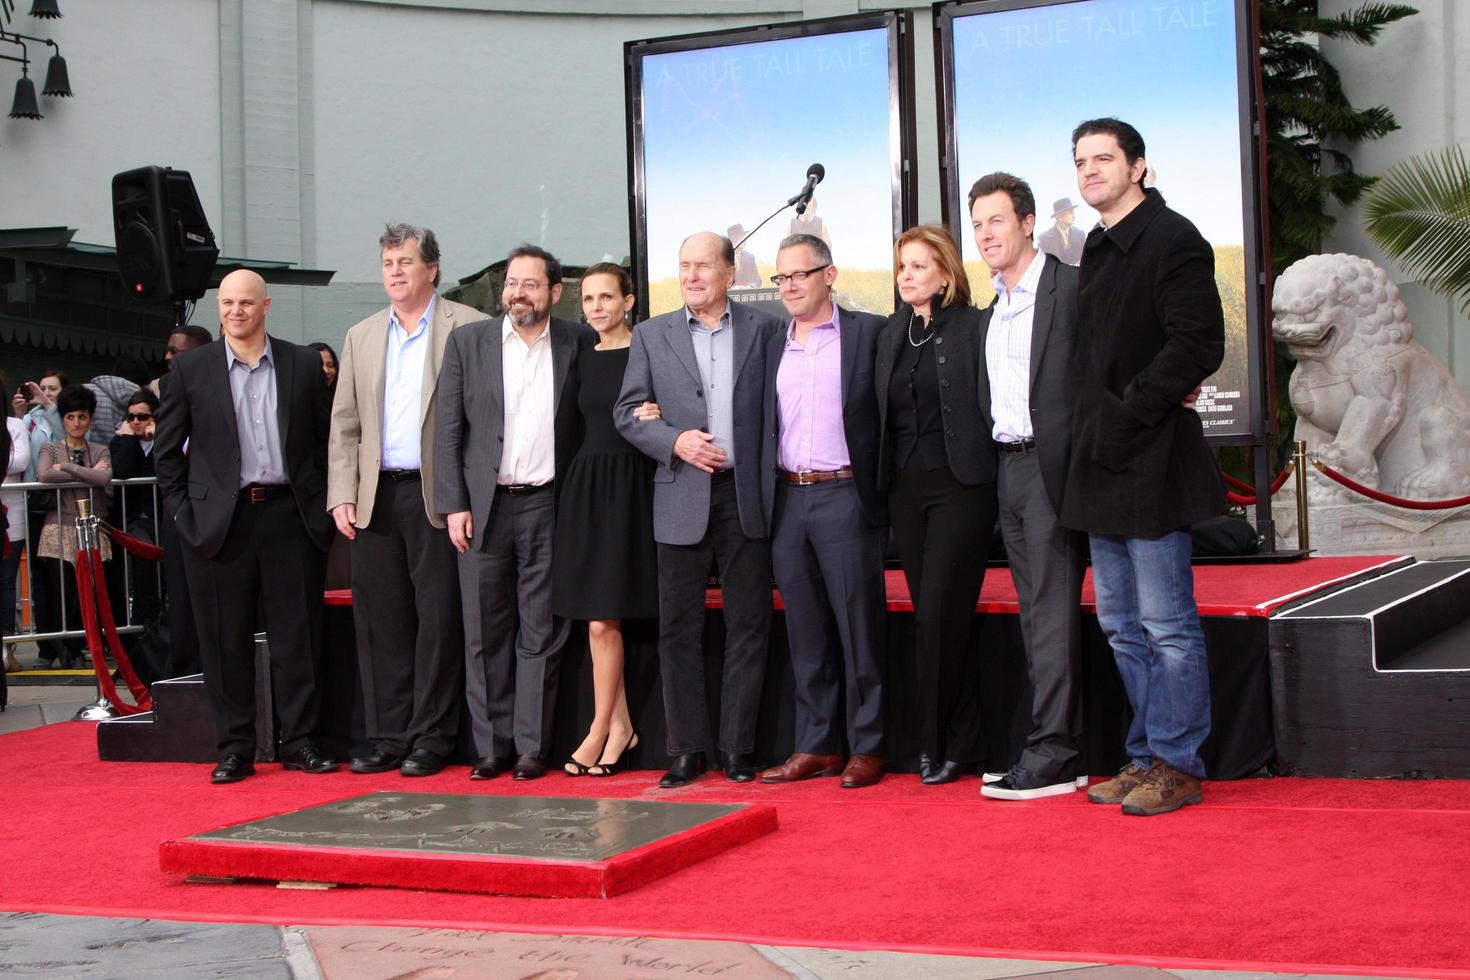 LOS ANGELES, JAN 5 - Luciana Pedraza, Robert Duvall, Guests at the Robert Duvall Hand and Footprint Ceremony at Grauman s Chinese Theater on January 5, 2011 in Los Angeles, CA photo